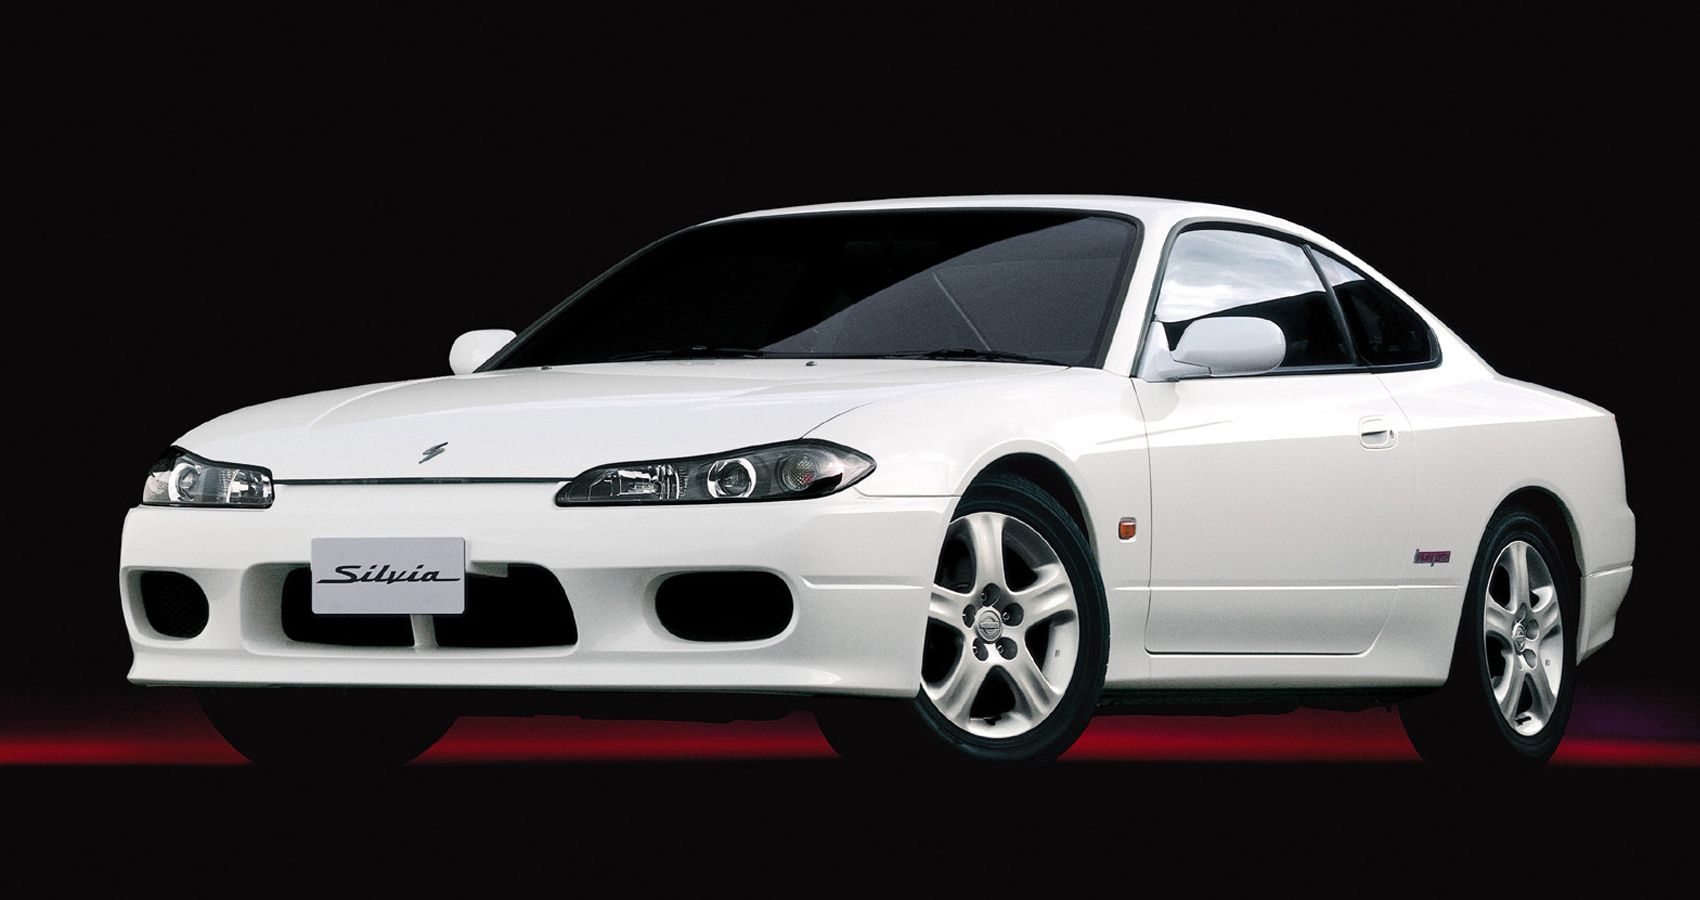 Front 3/4 view of a white Silvia S15